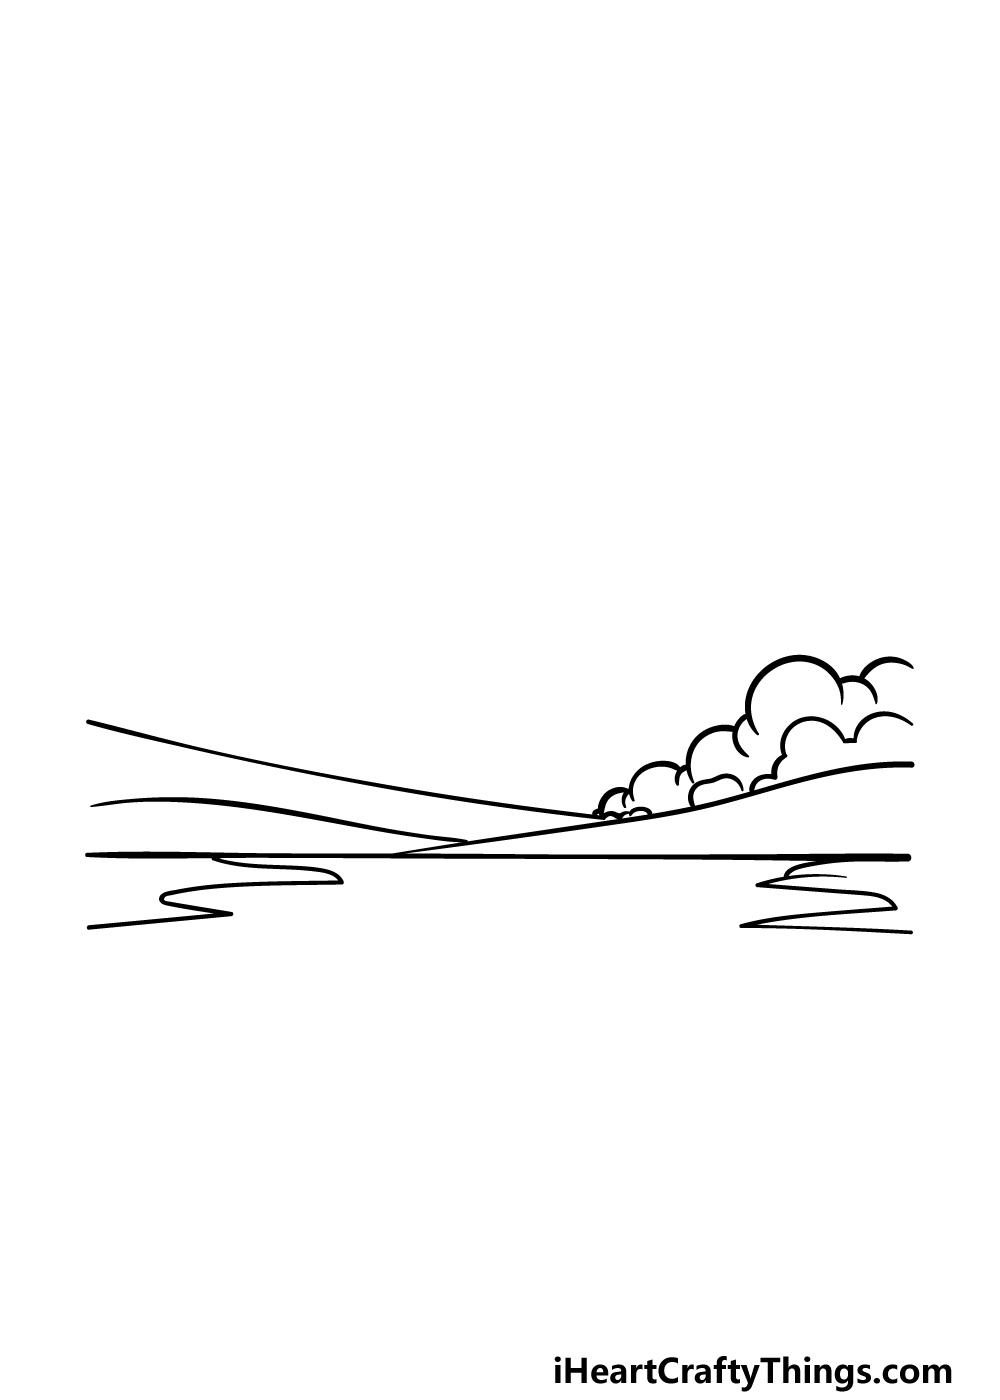 how to draw a Simple Landscape step 2